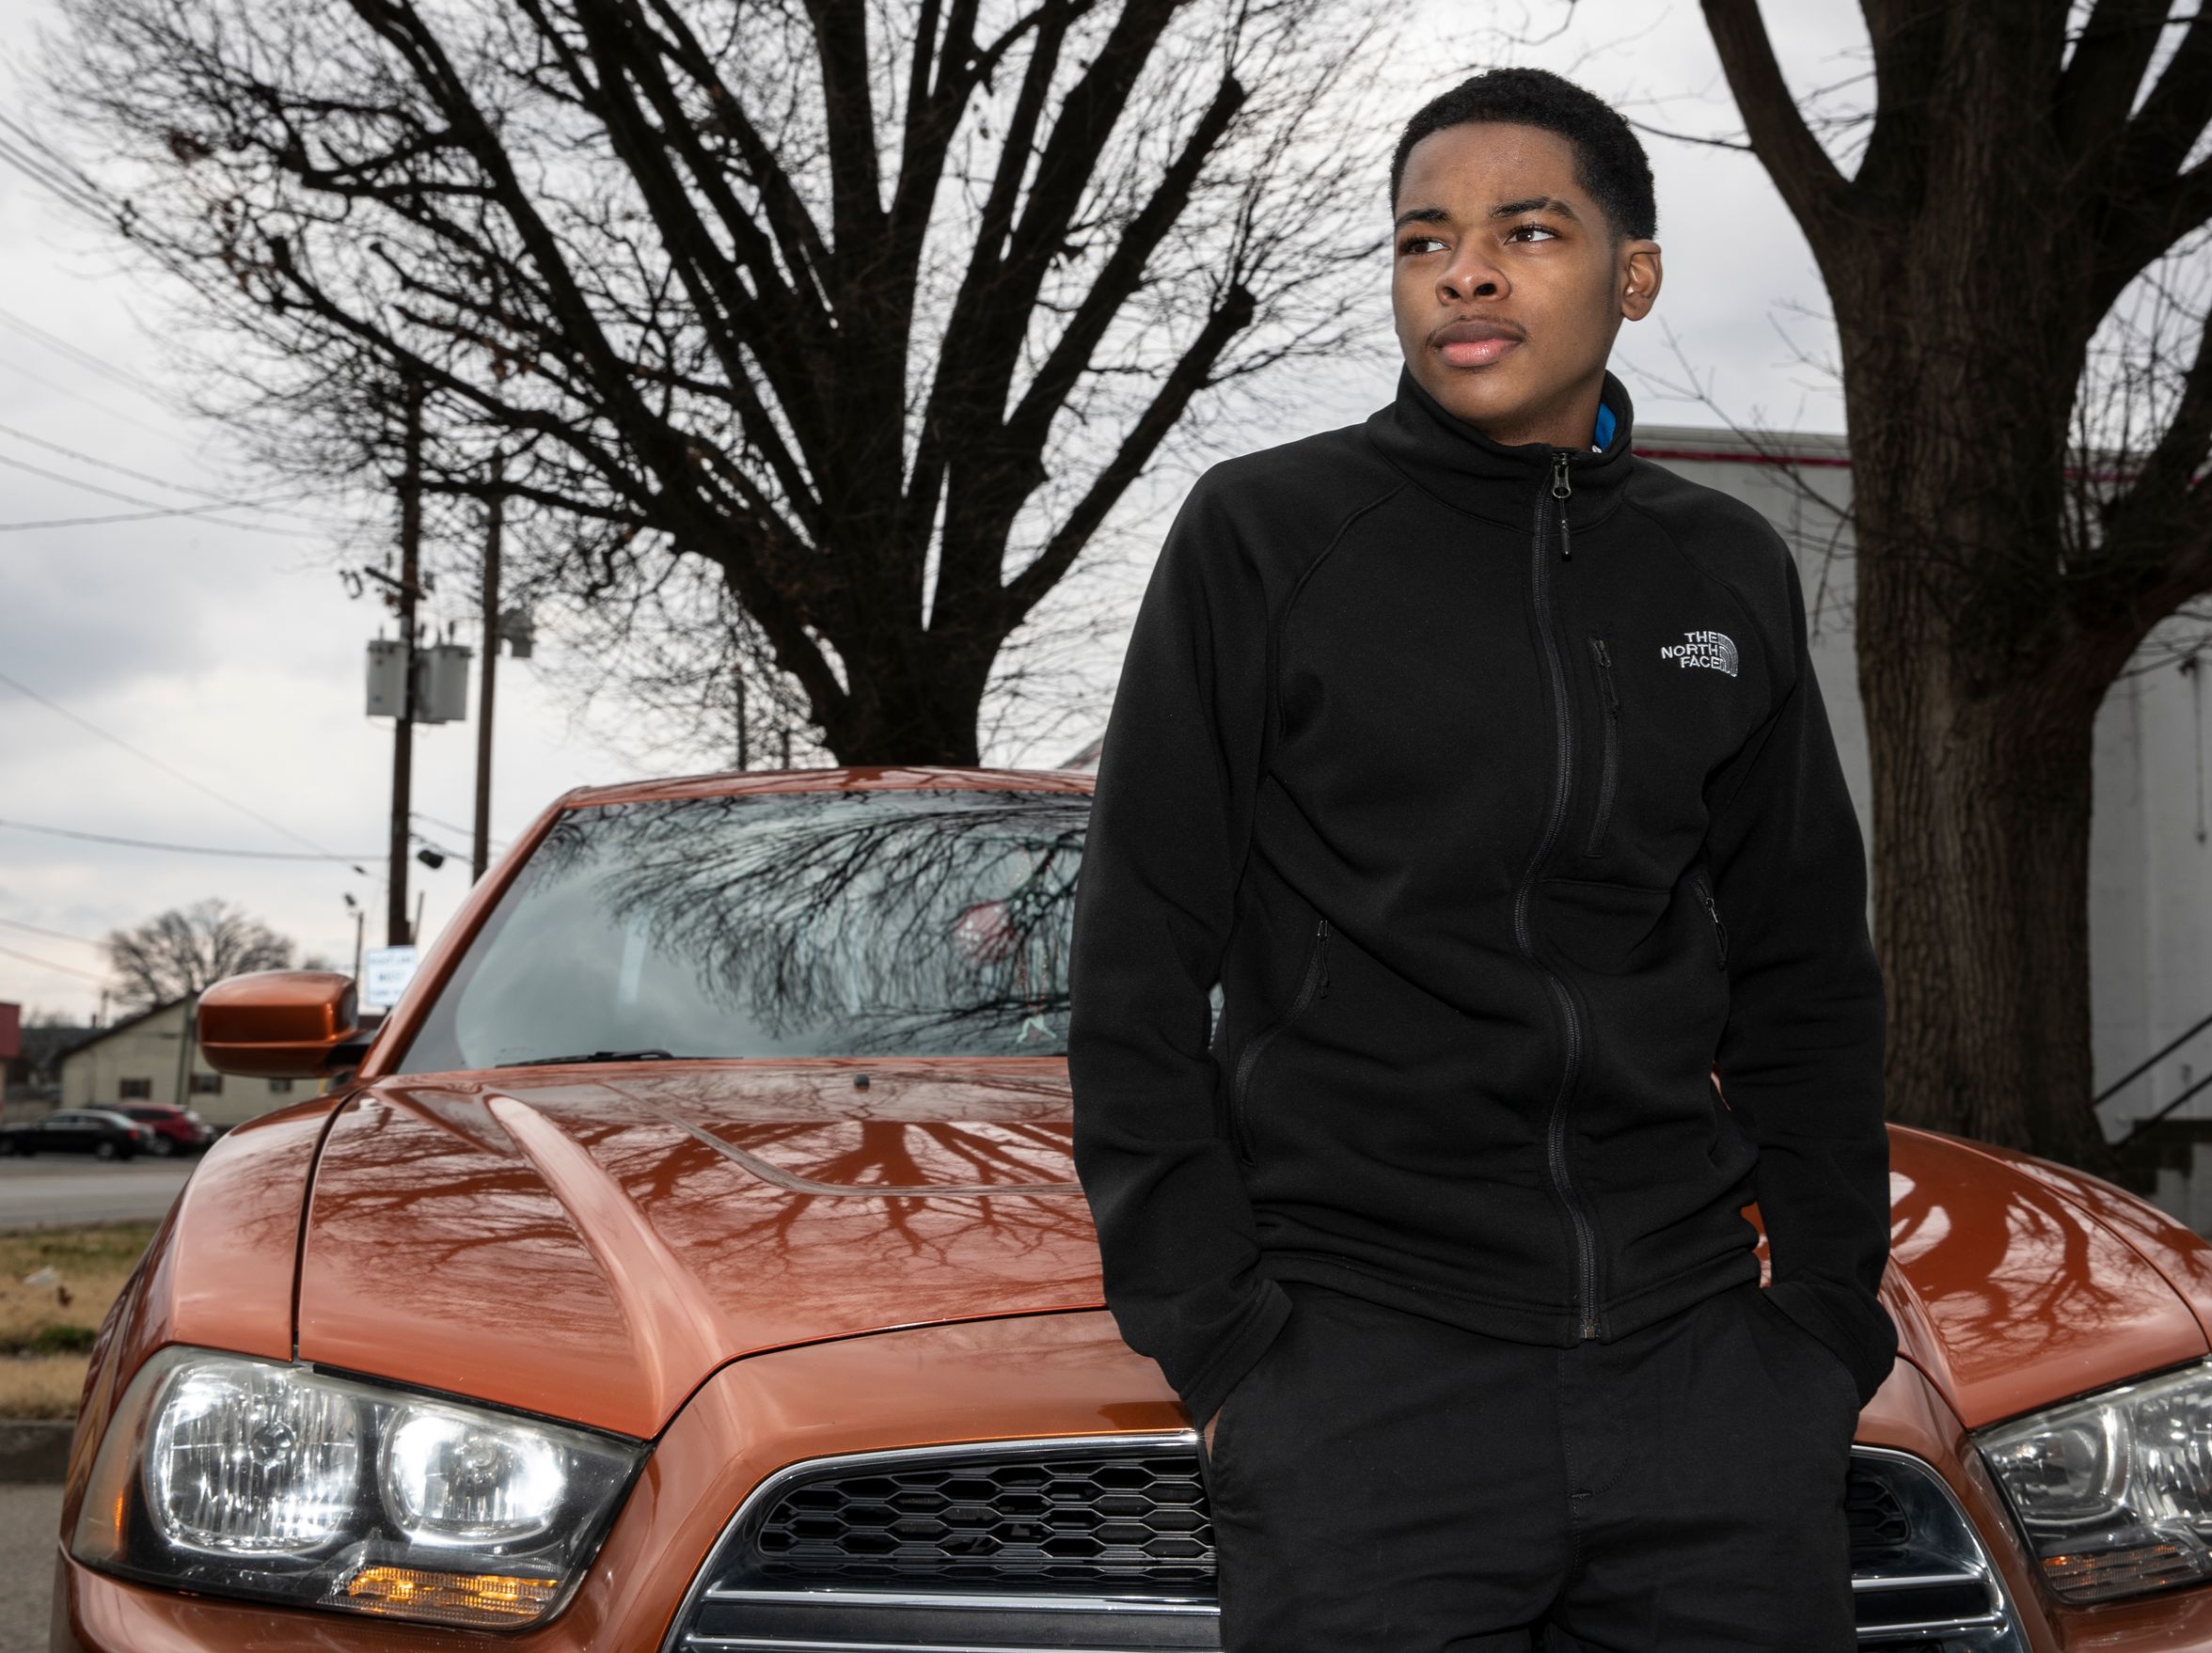 Tae-Ahn Lea, 18 was stopped by police, frisked and handcuffed at 18th and Burwell Ave. He is seen with the car he was driving. March 21, 2019.